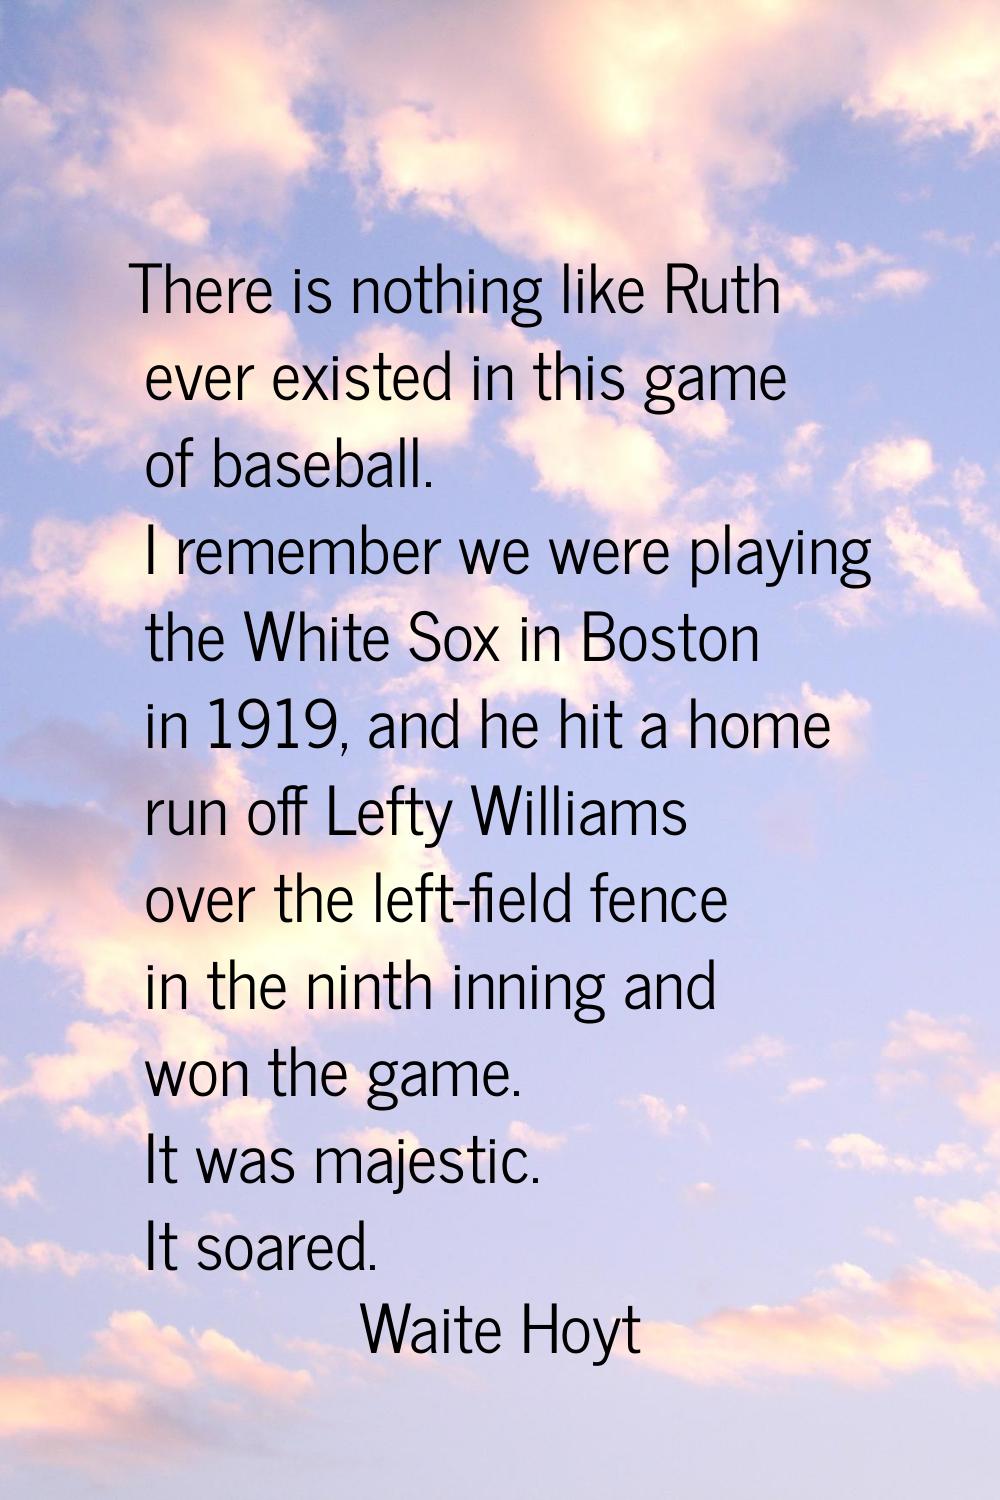 There is nothing like Ruth ever existed in this game of baseball. I remember we were playing the Wh